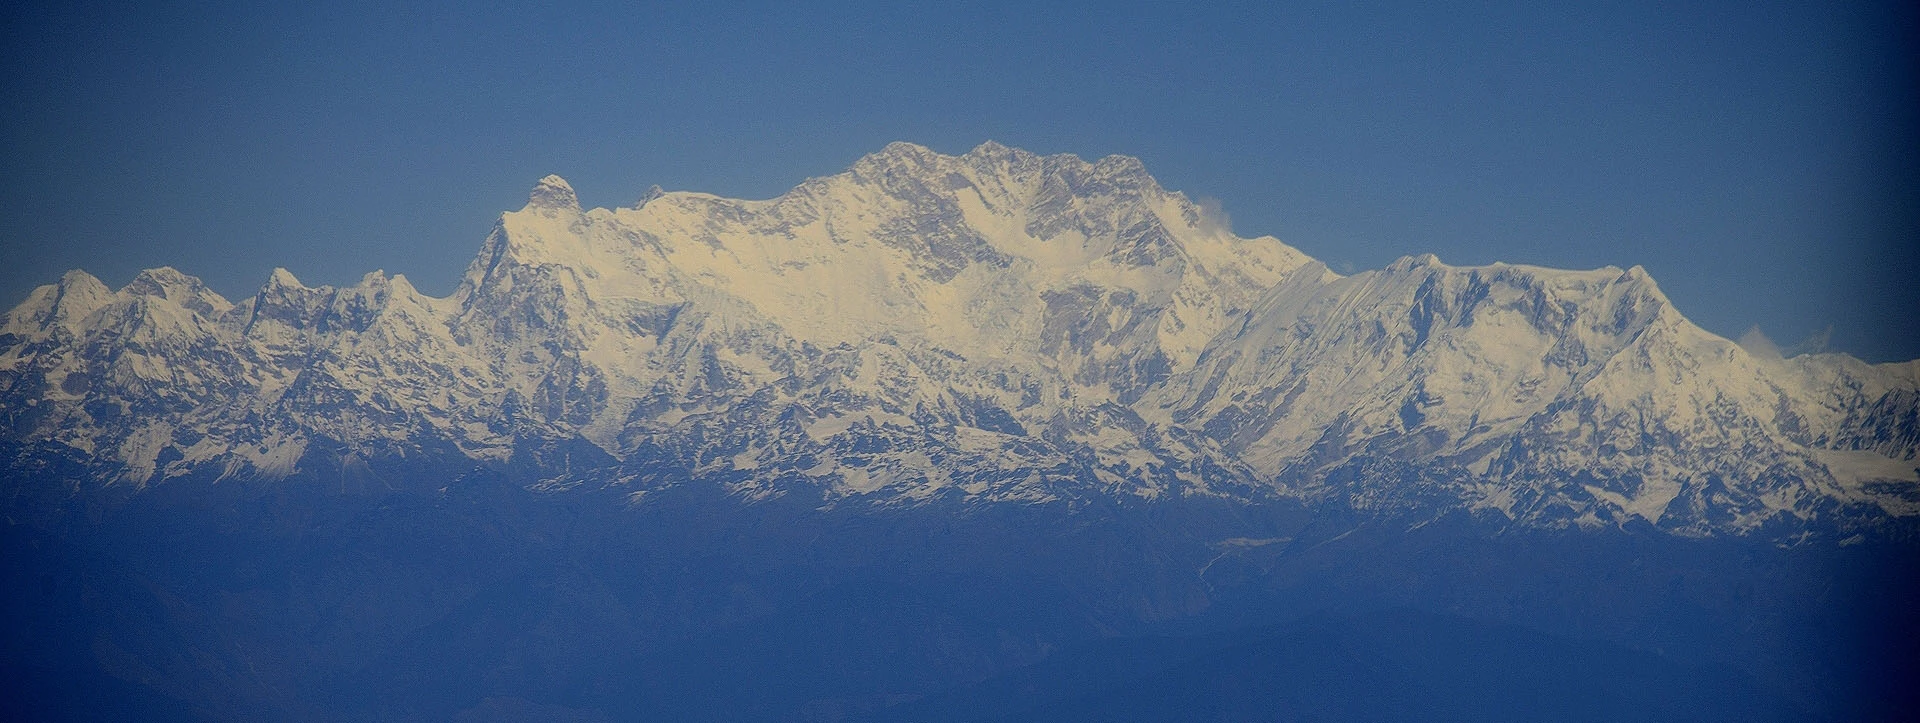 When Is The Best Time For Trekking To Kanchenjunga Base Camp In Nepal